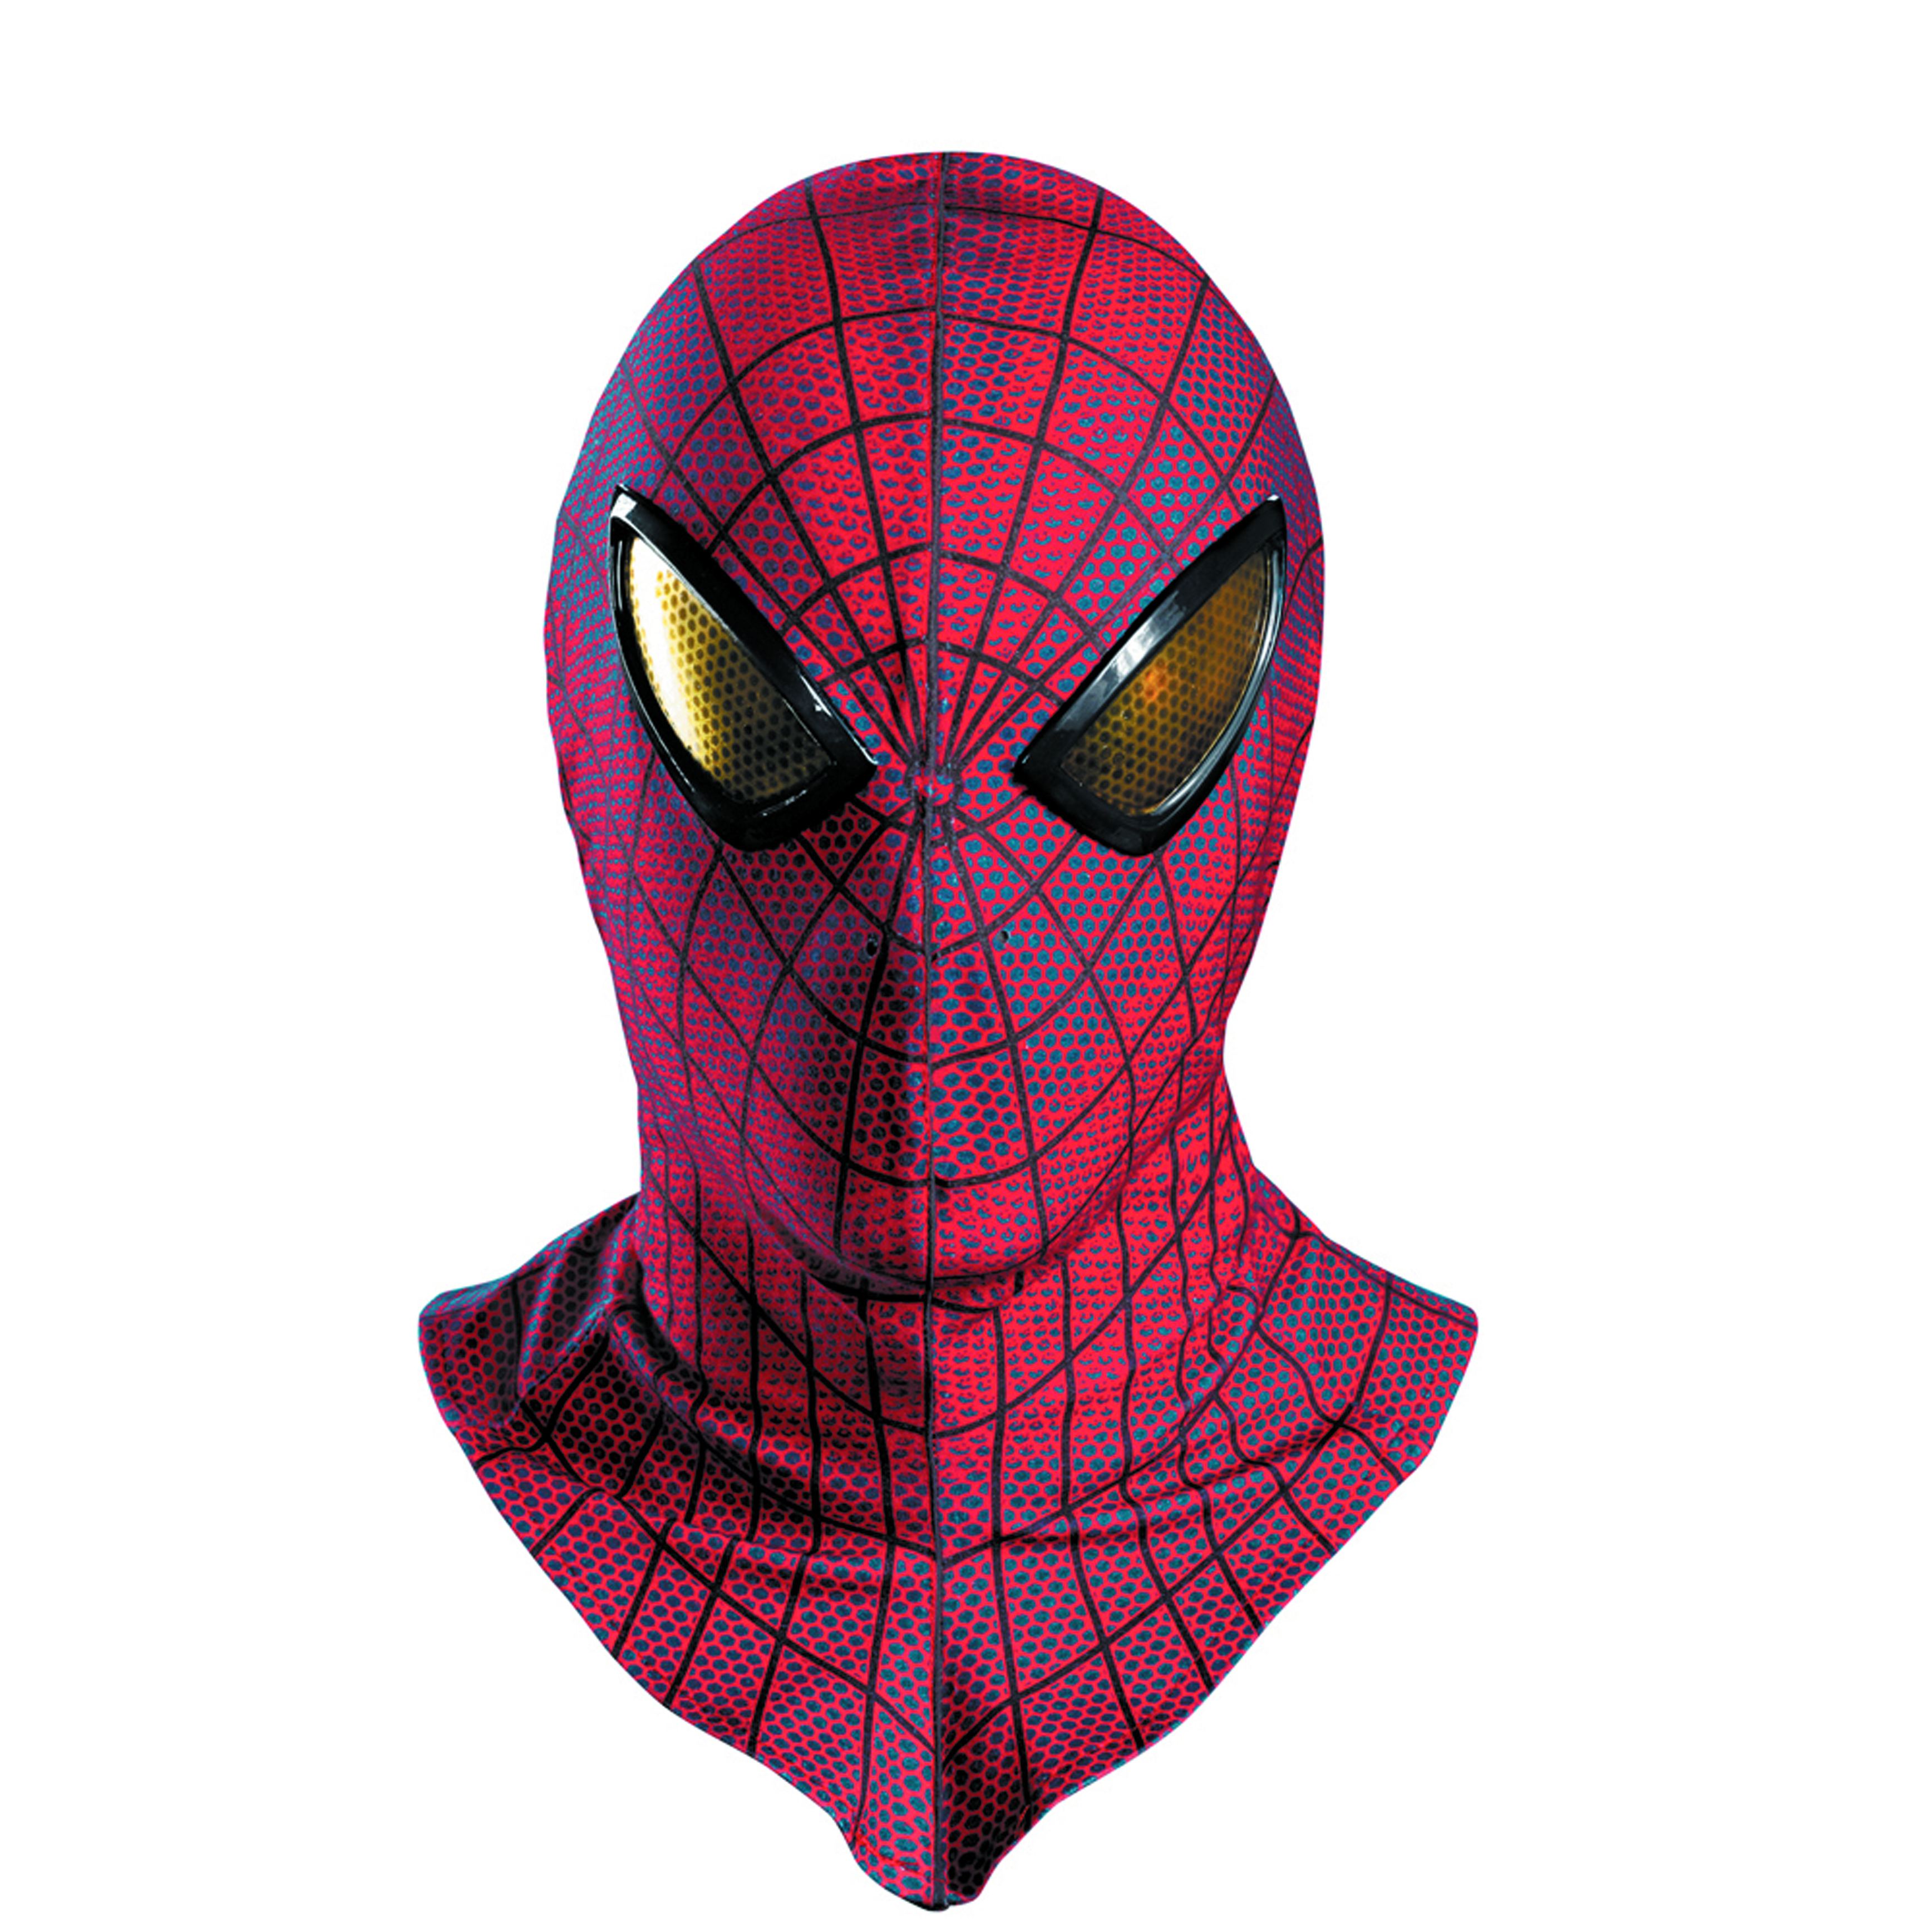 AMAZING SPIDER-MAN ADULT DELUXE MASK